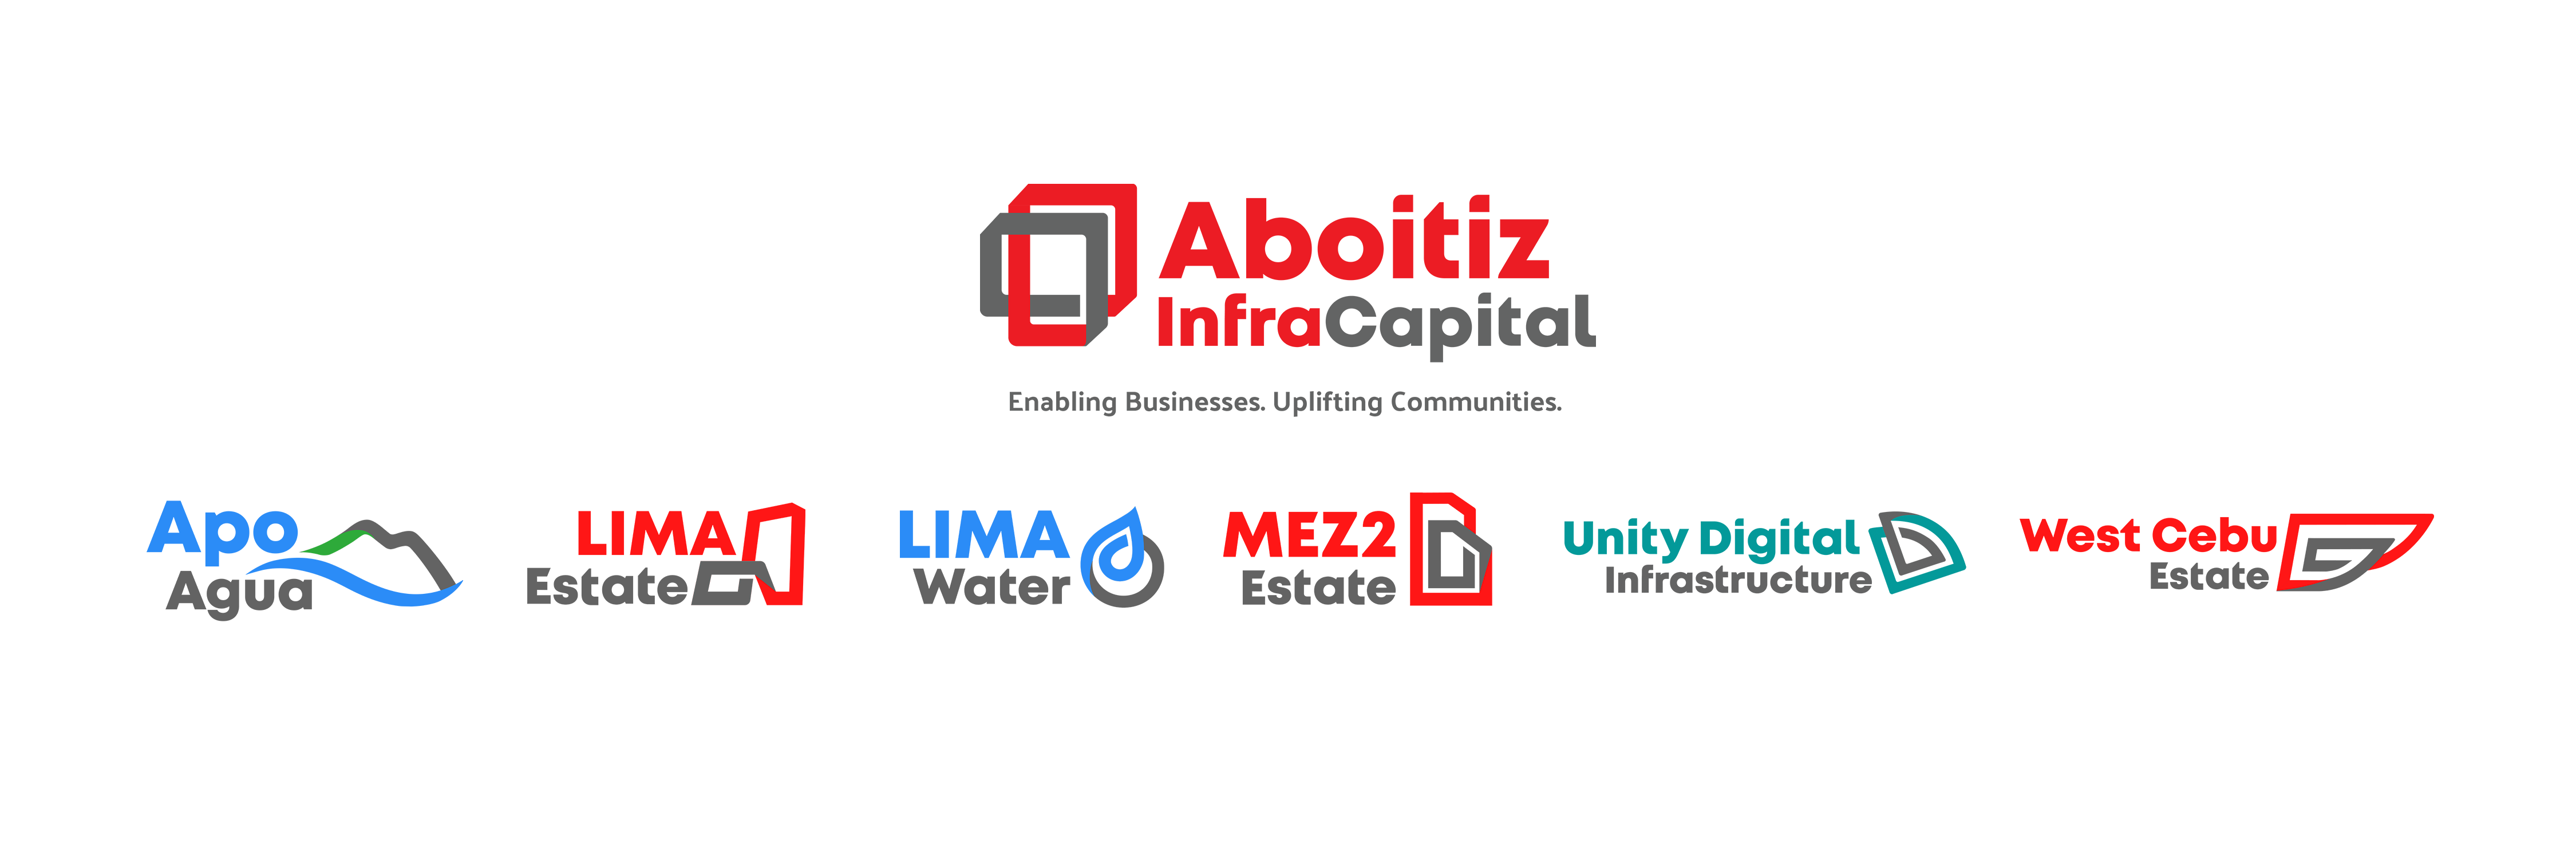 Aboitiz InfraCapital rebrands in line with bold prospects